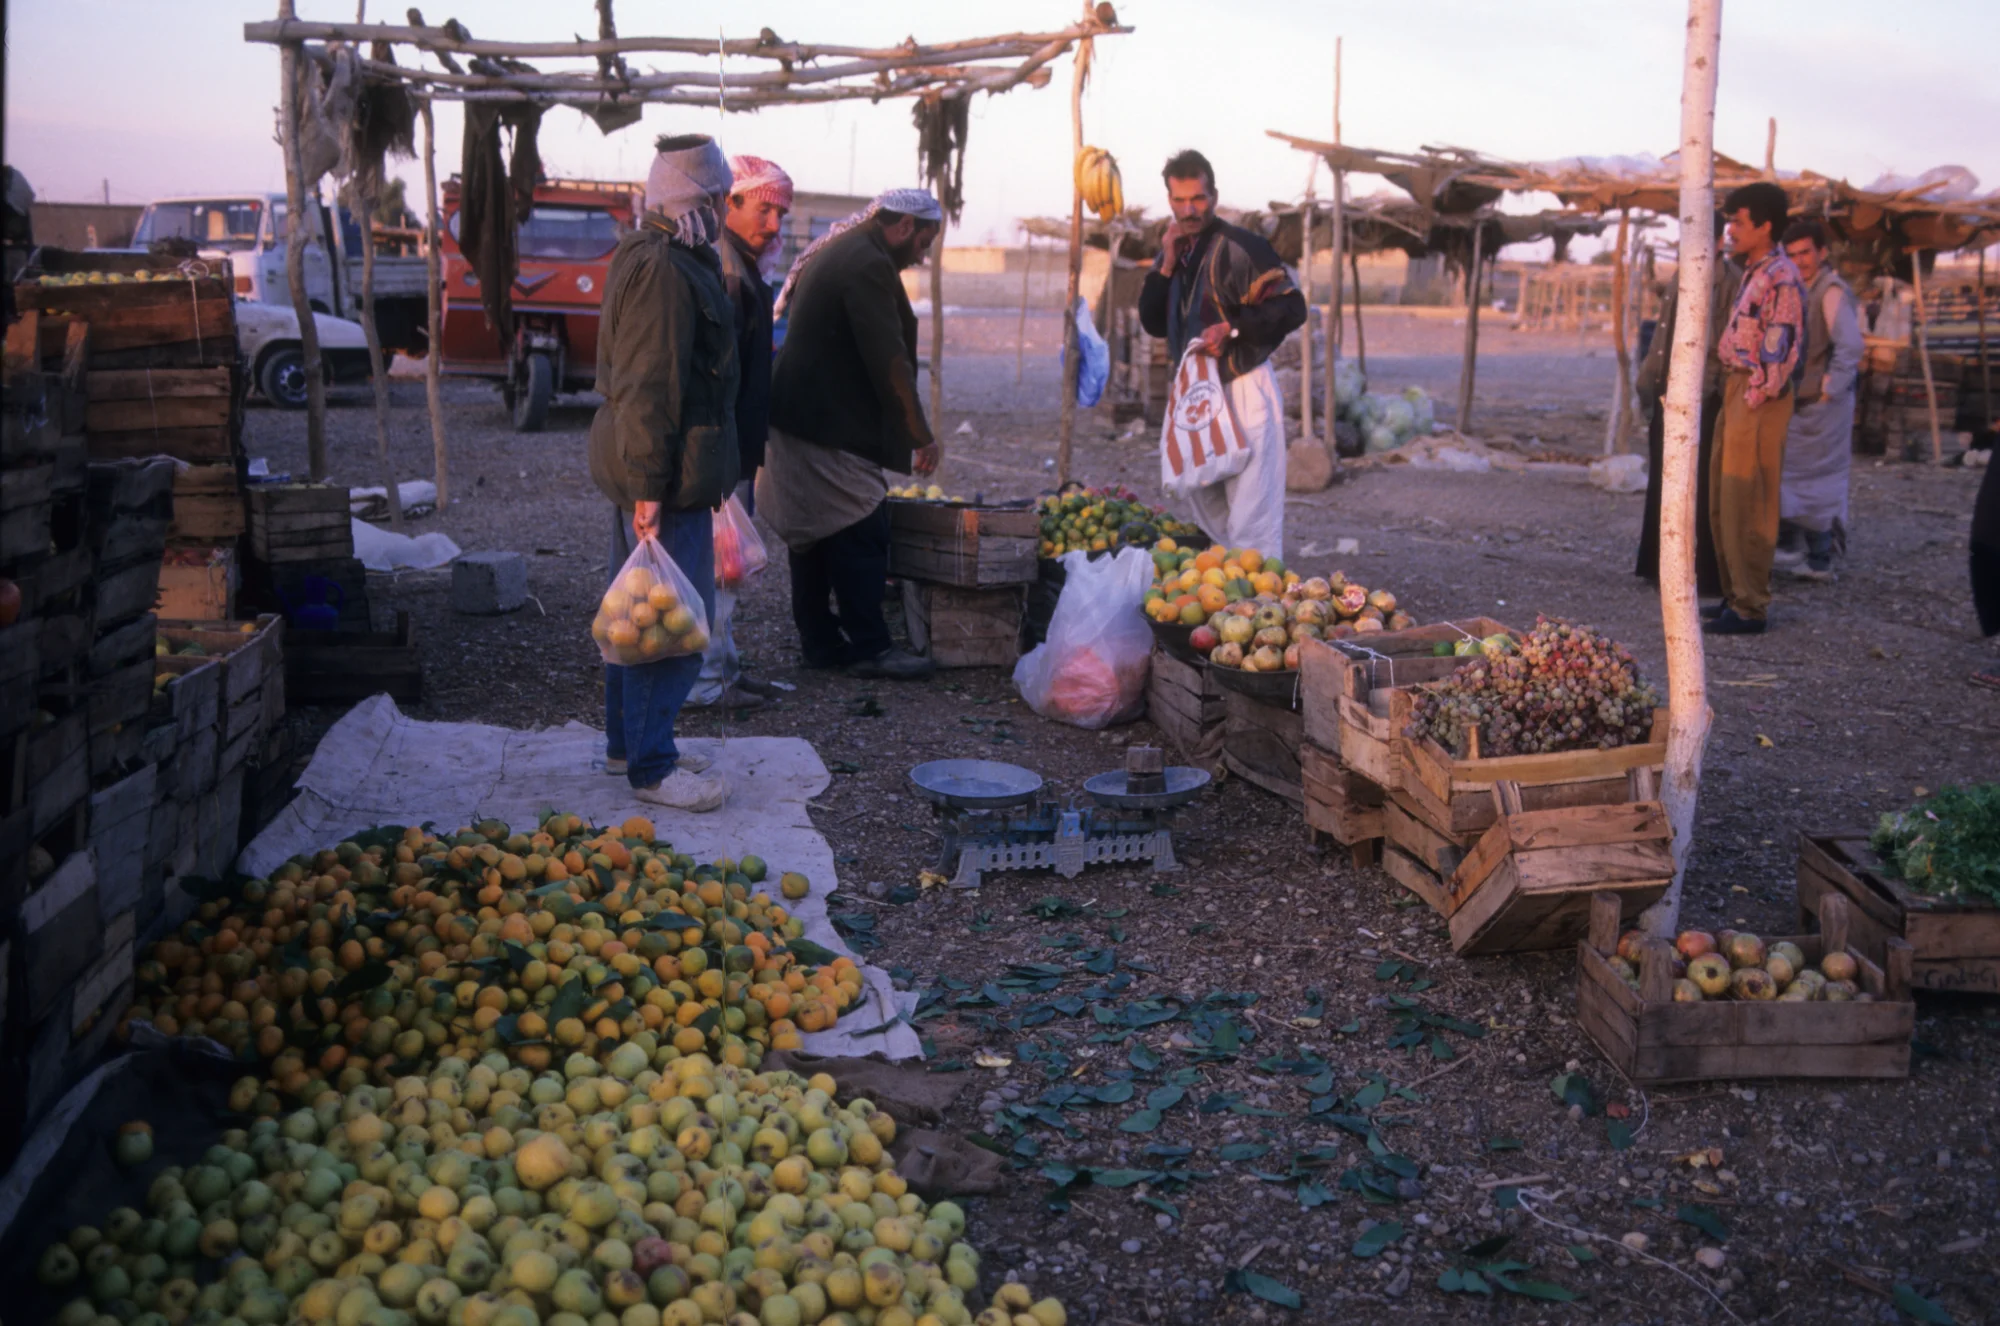 Weekly market in Maskana, where the farmers of the region sell their fruit and vegetables